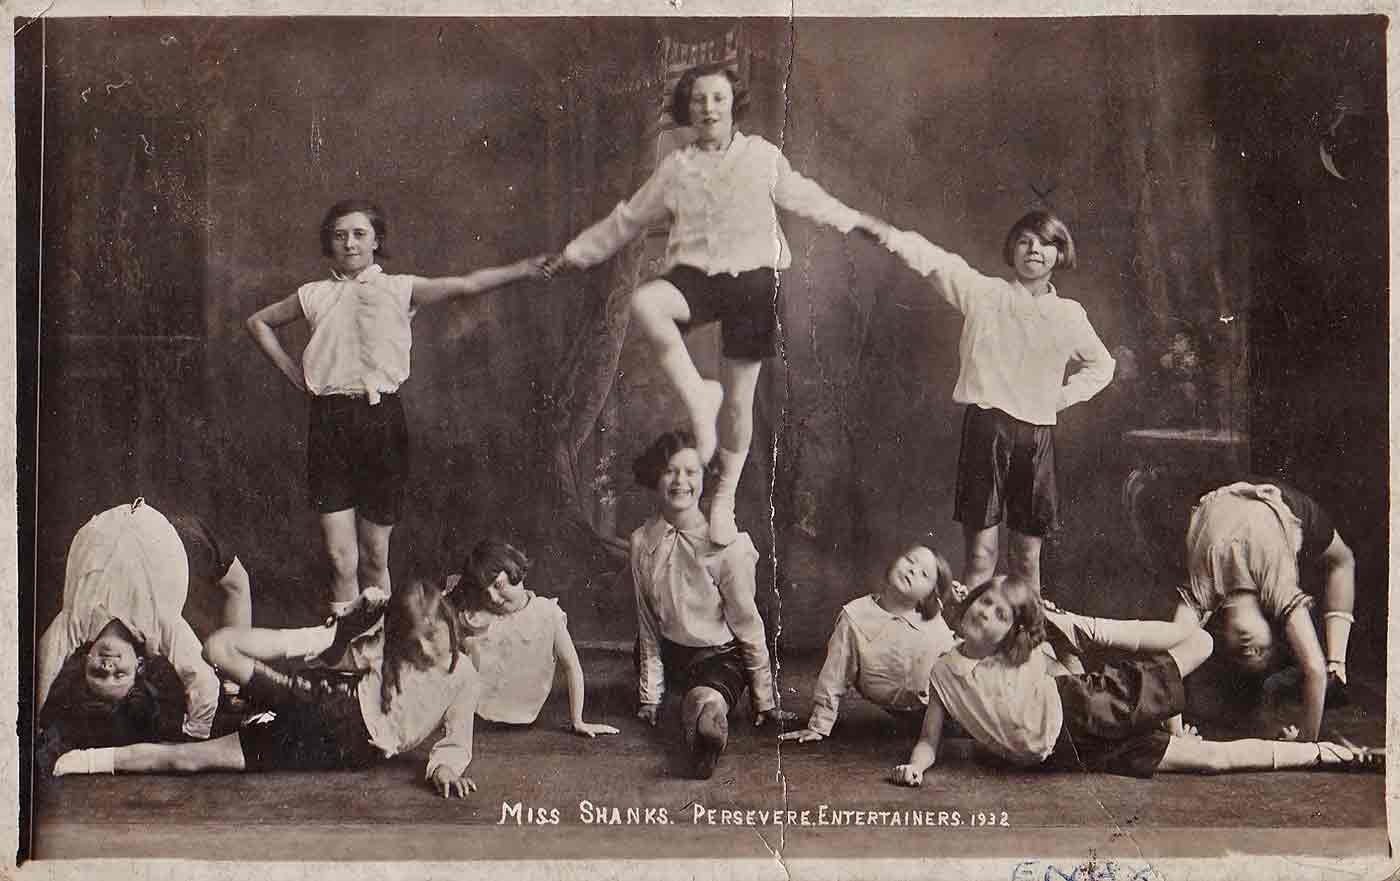 Miss Shanks' Persevere Entertainers, 1932